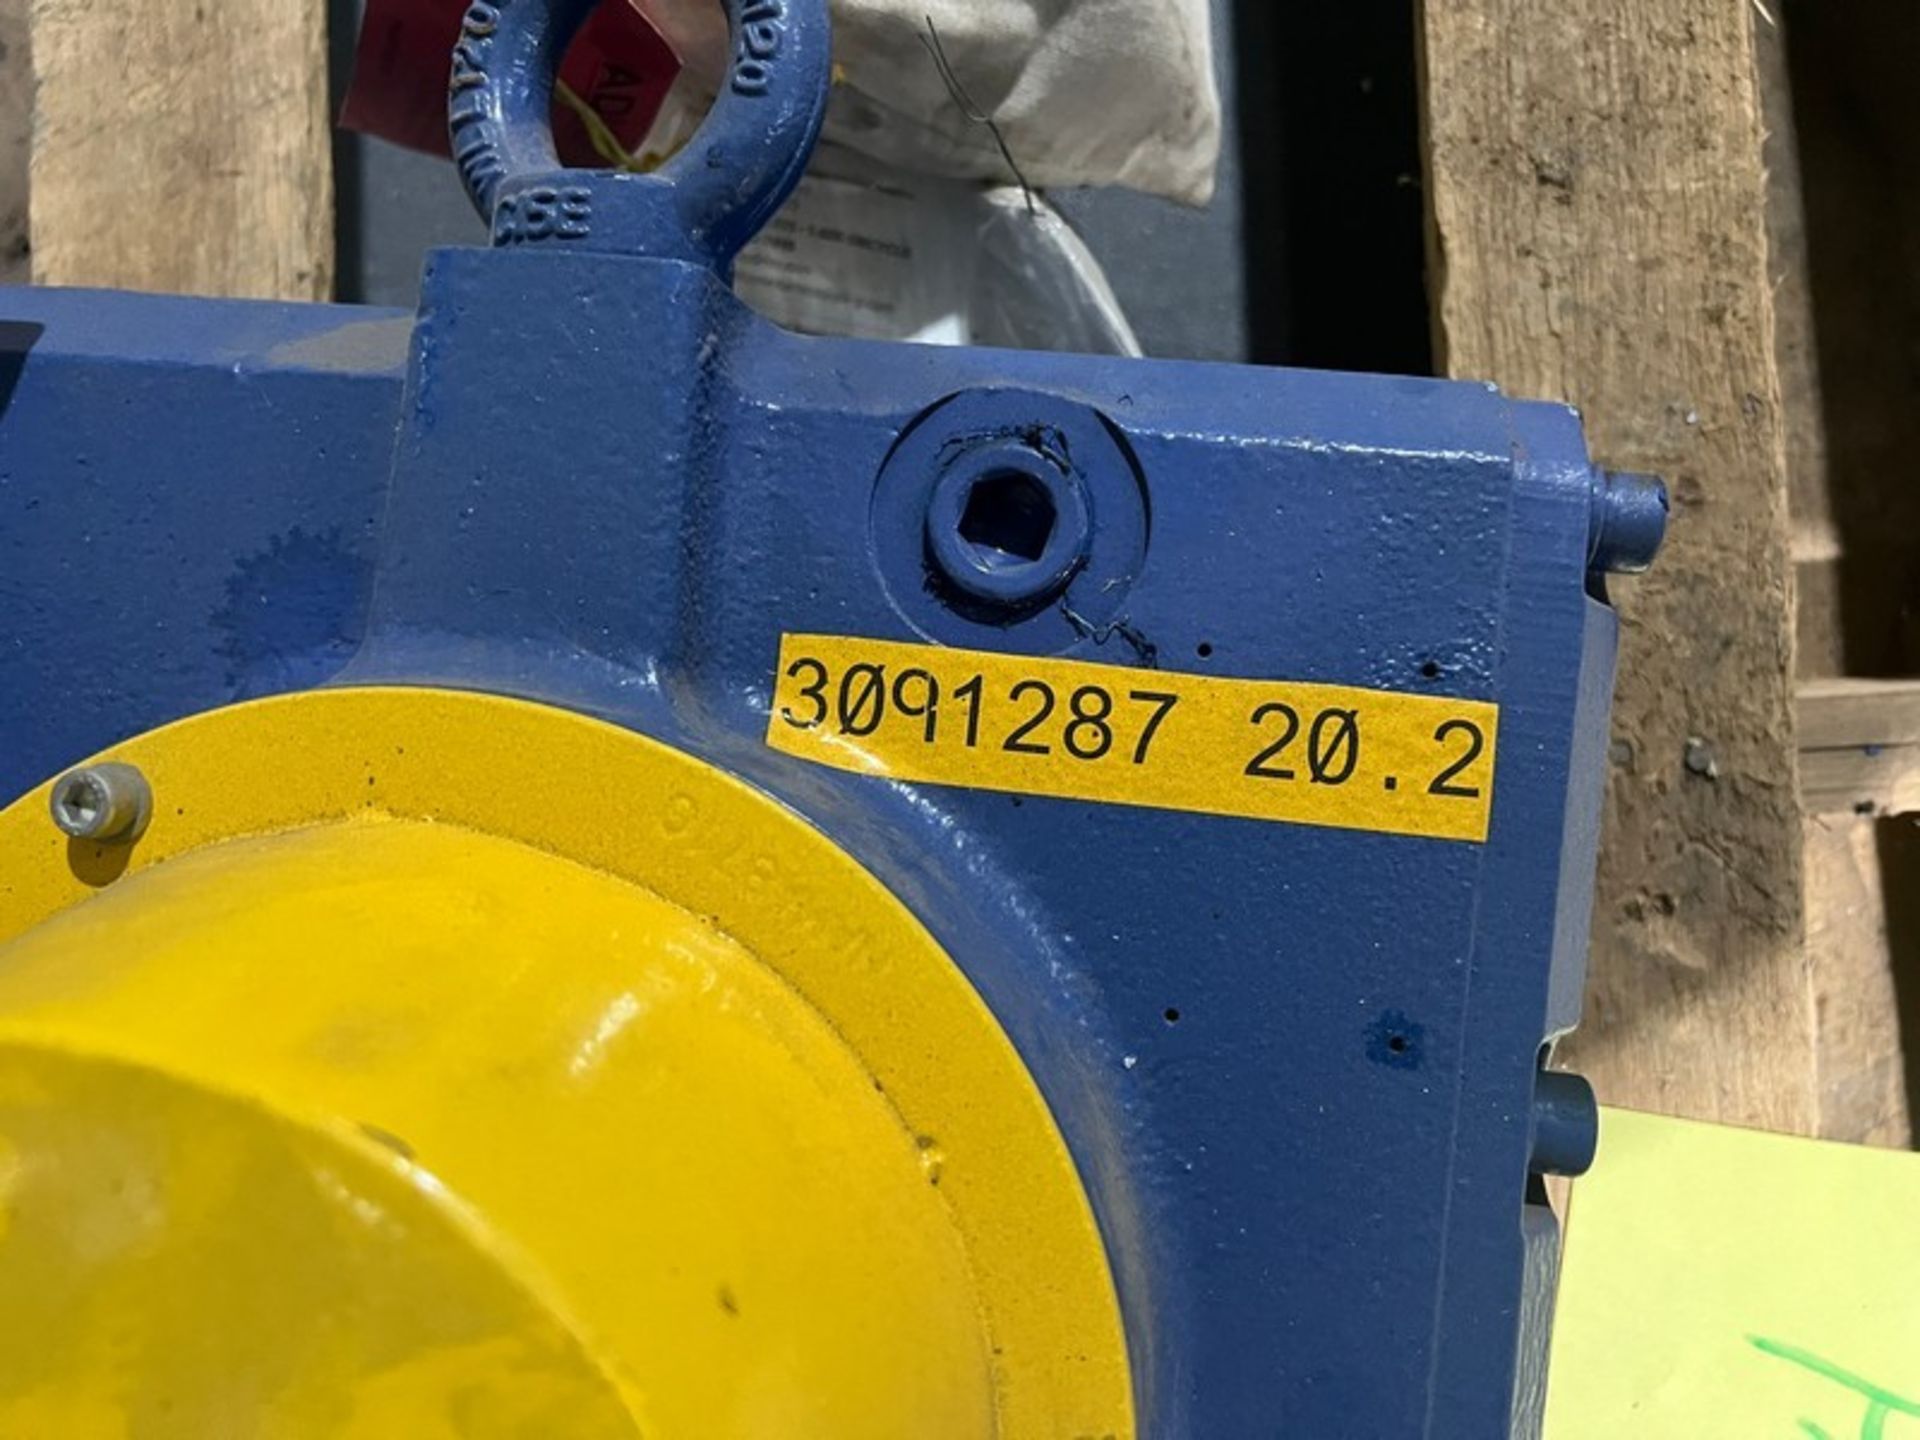 Sumitomo Gear Reducer (2019) (RIGGING INCLUDED WITH SALE PRICE) --Loading Fee $45.00***EUSA*** - Image 3 of 10